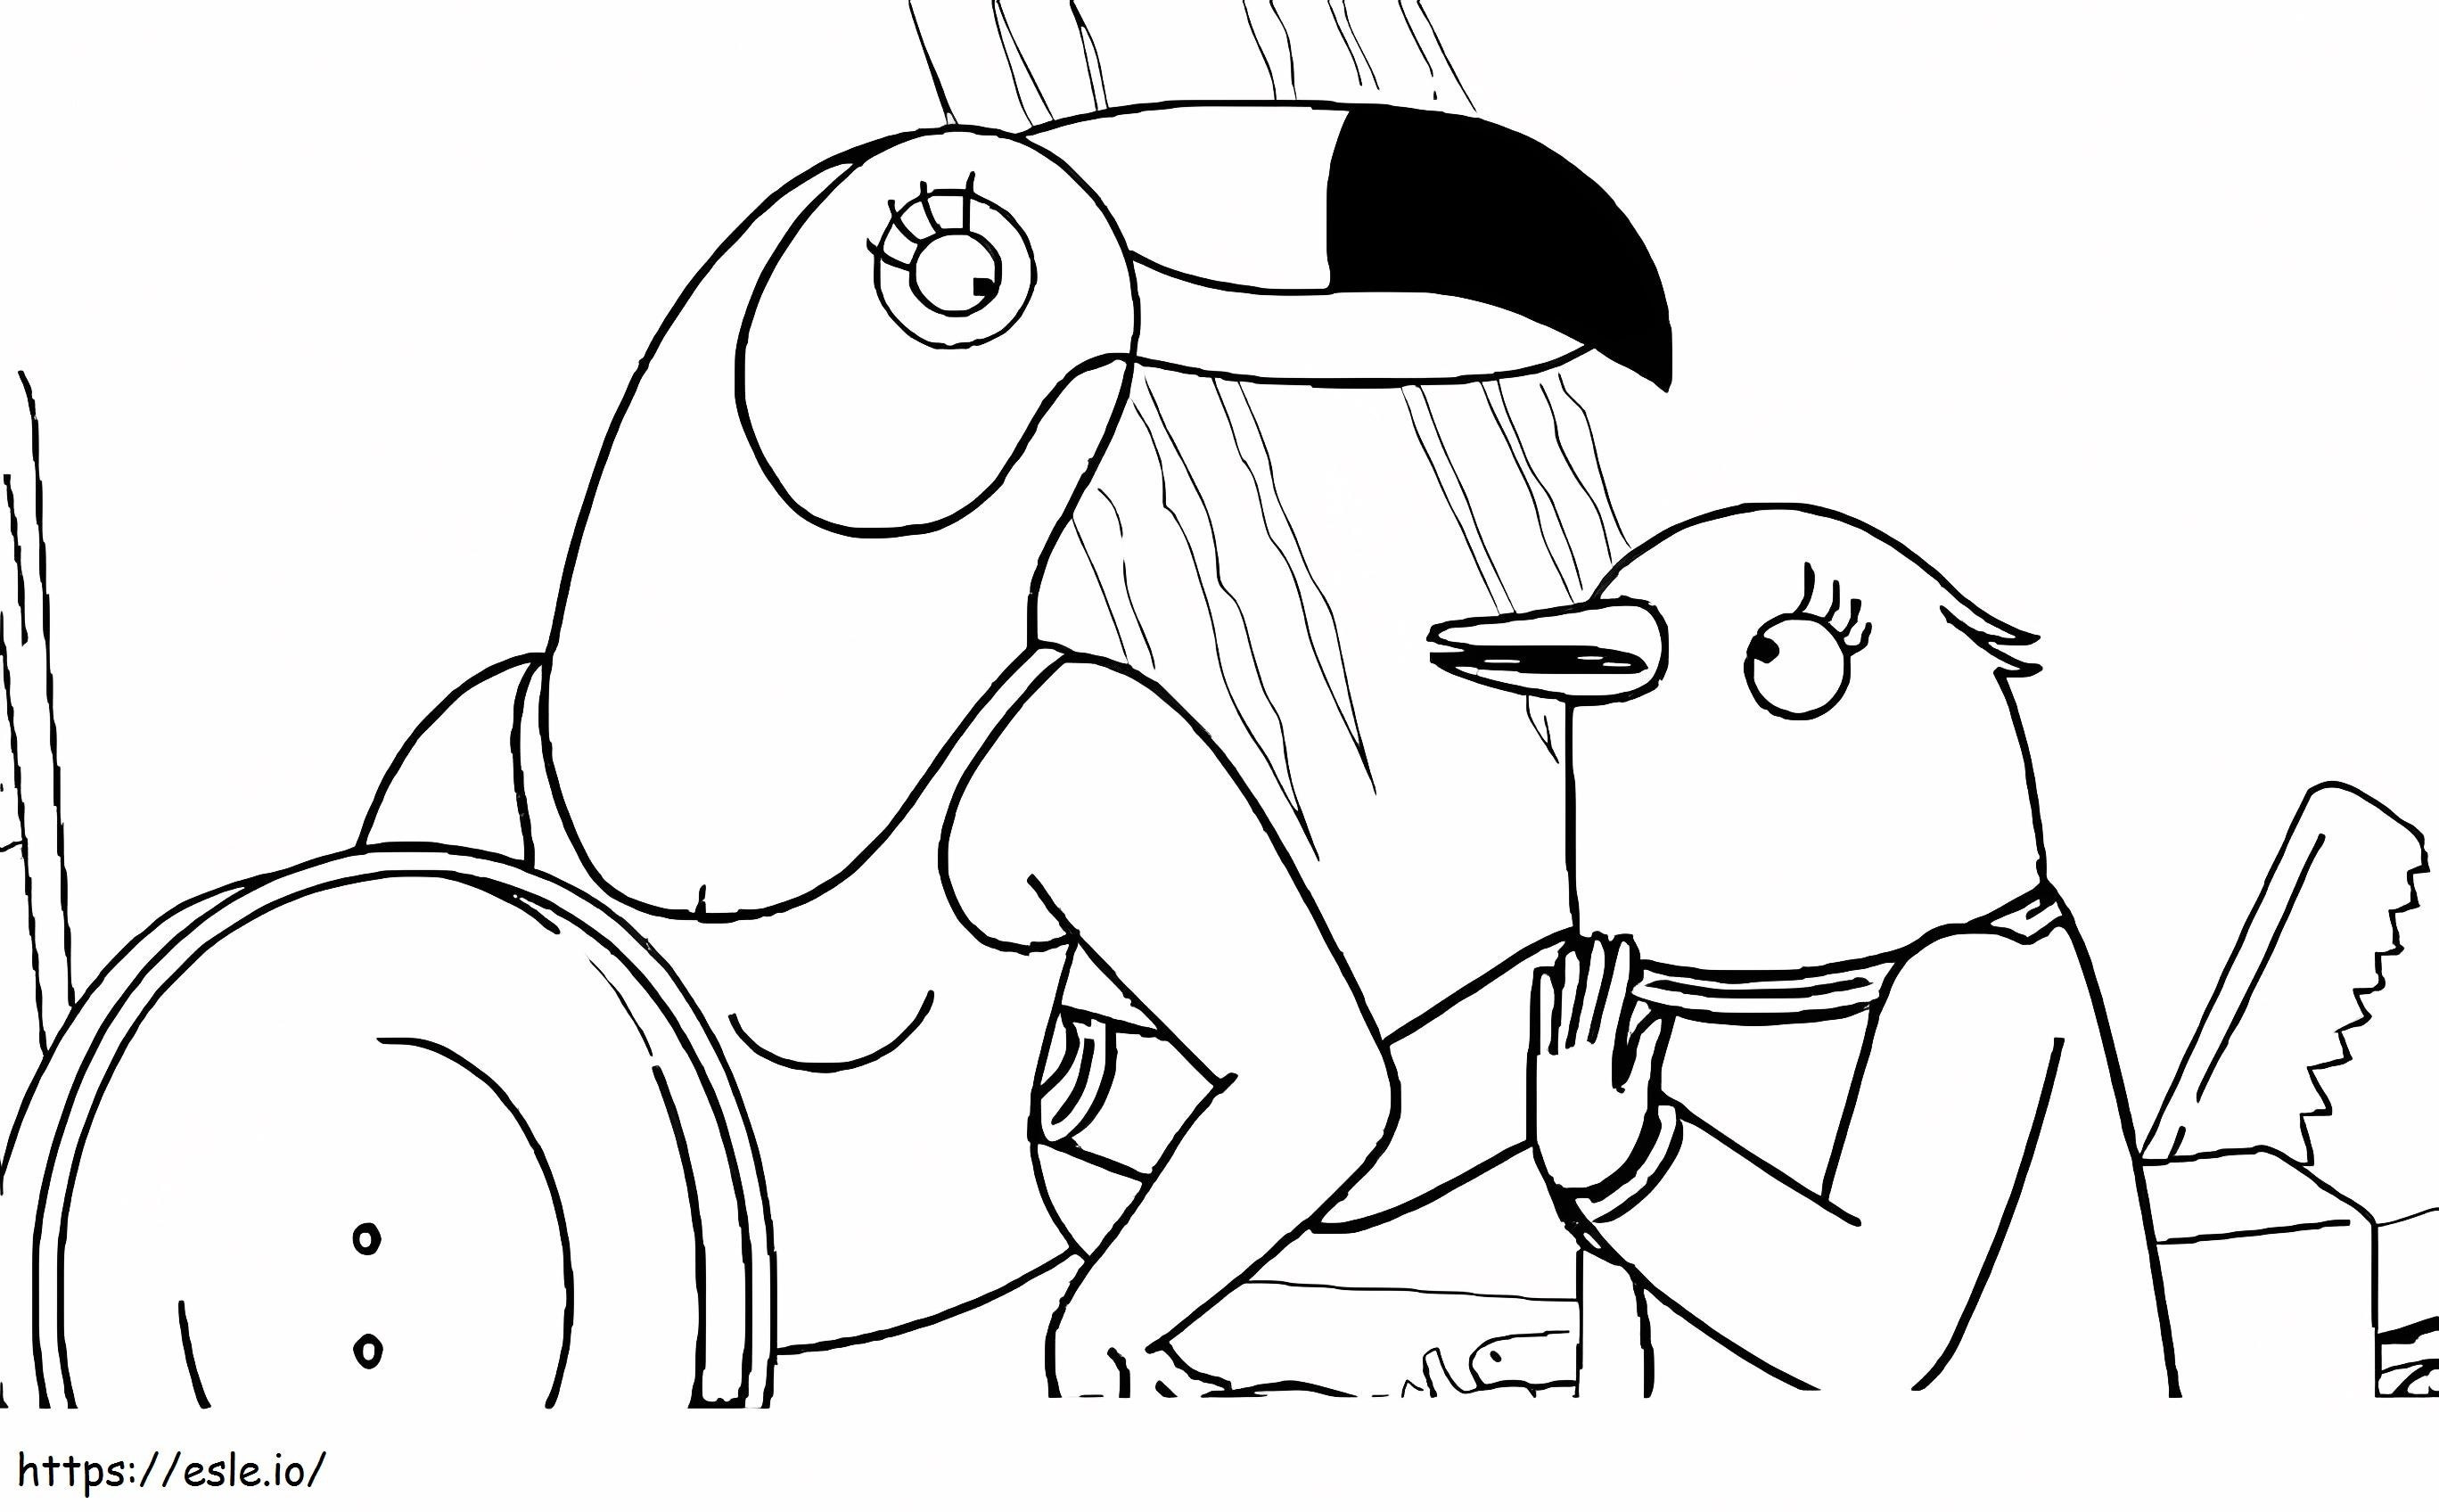 Printable Tuca And Bertie coloring page